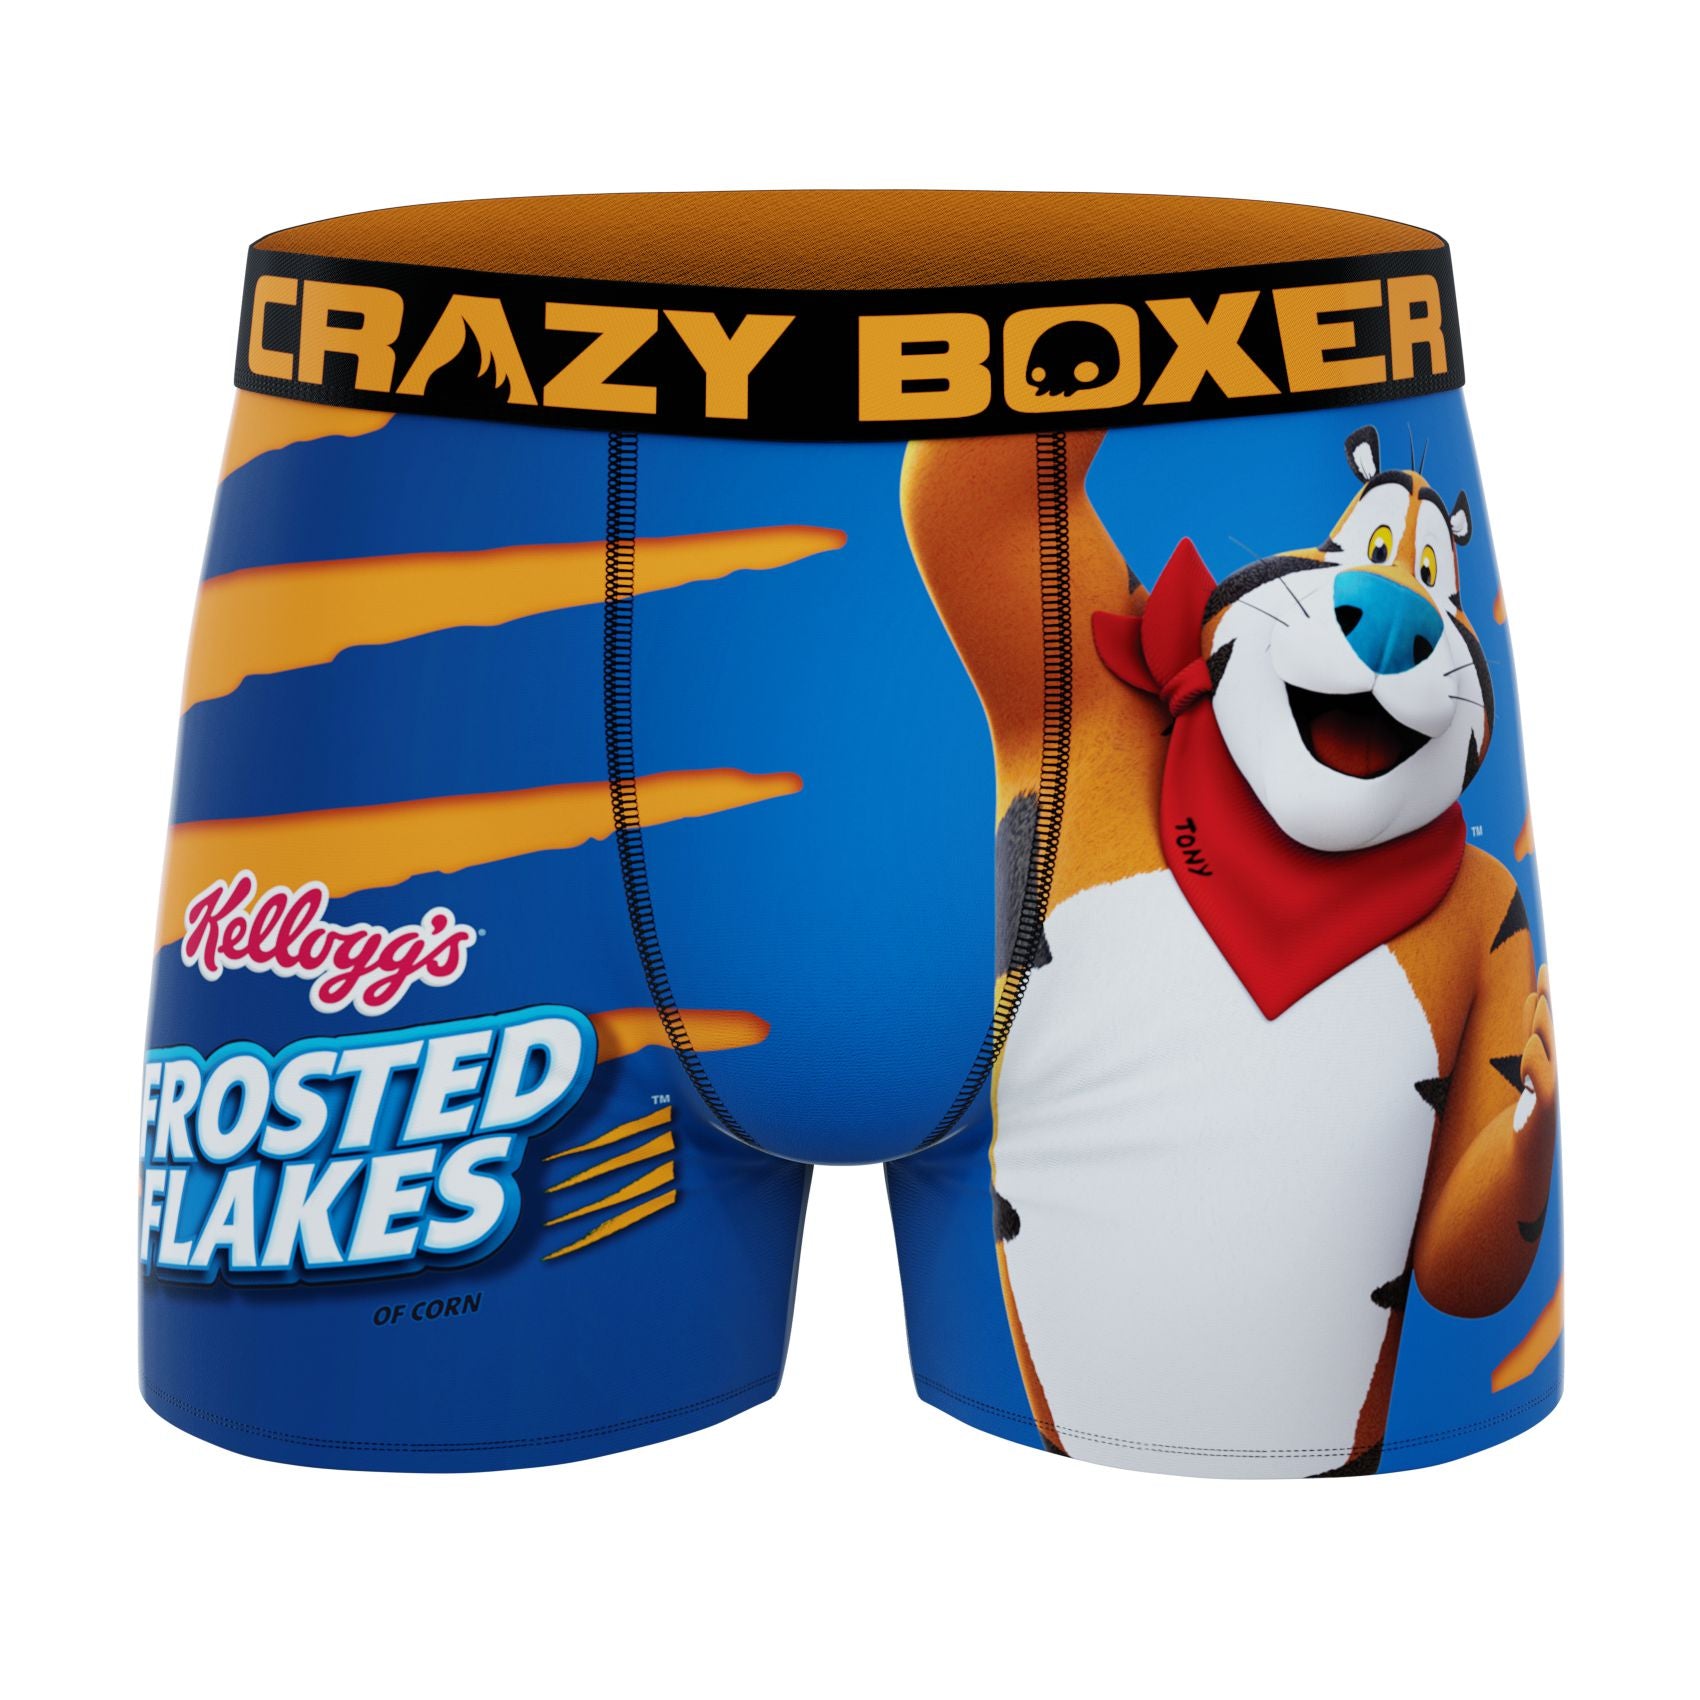 CRAZYBOXER Kellogg's Cereals Boy's Boxer Briefs 3 Pack (Creative Packaging)